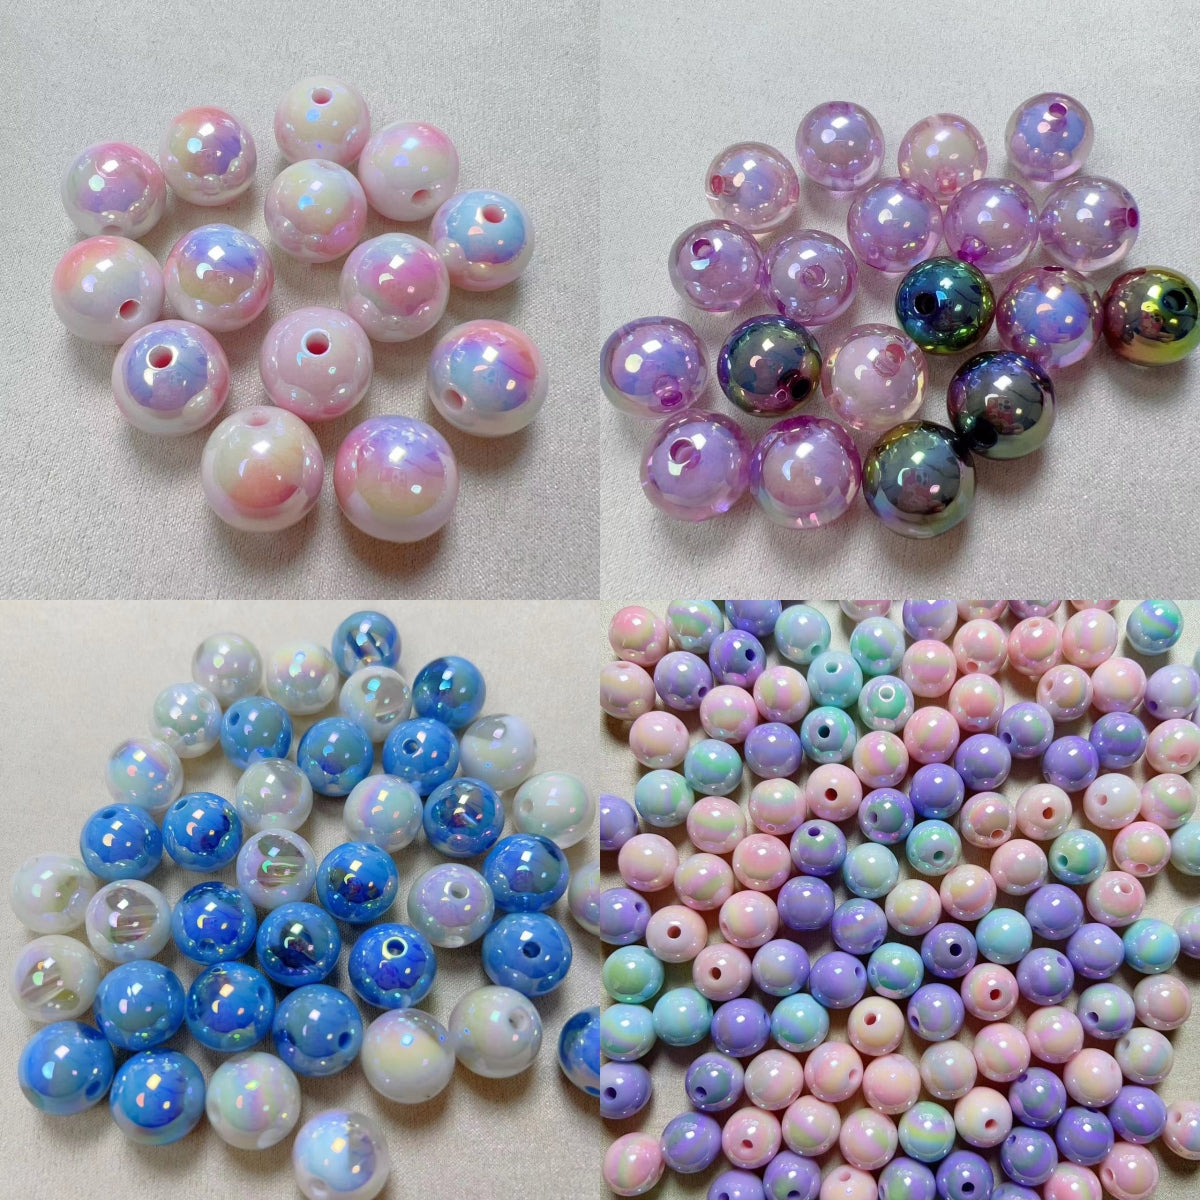 Wholesale Shiny Colorful Resin Beads For DIY,Phone Chain, Bracelet , Jewelry Making